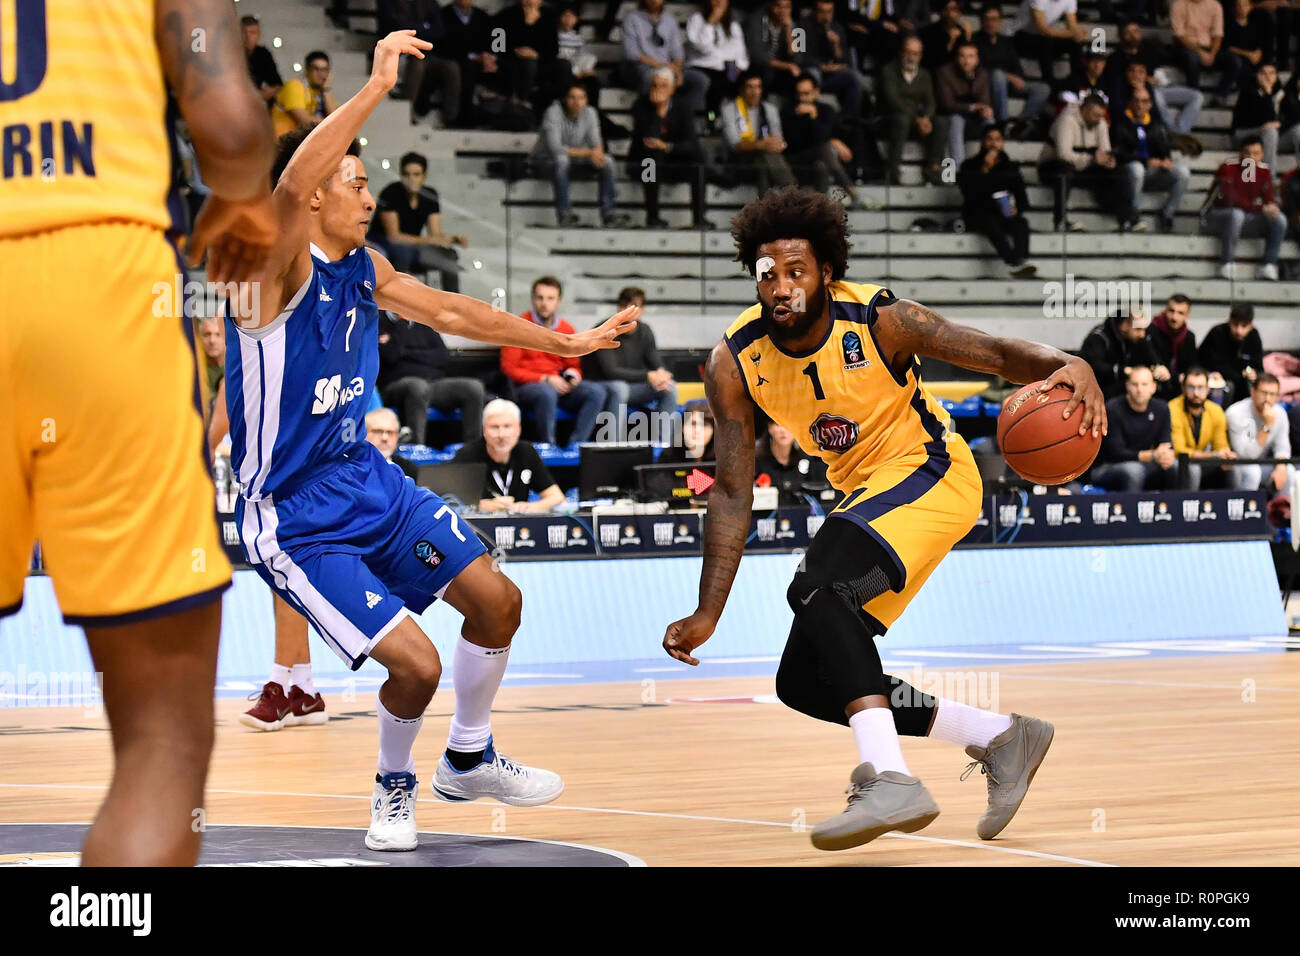 Eurocup 7 High Resolution Stock Photography and Images - Alamy